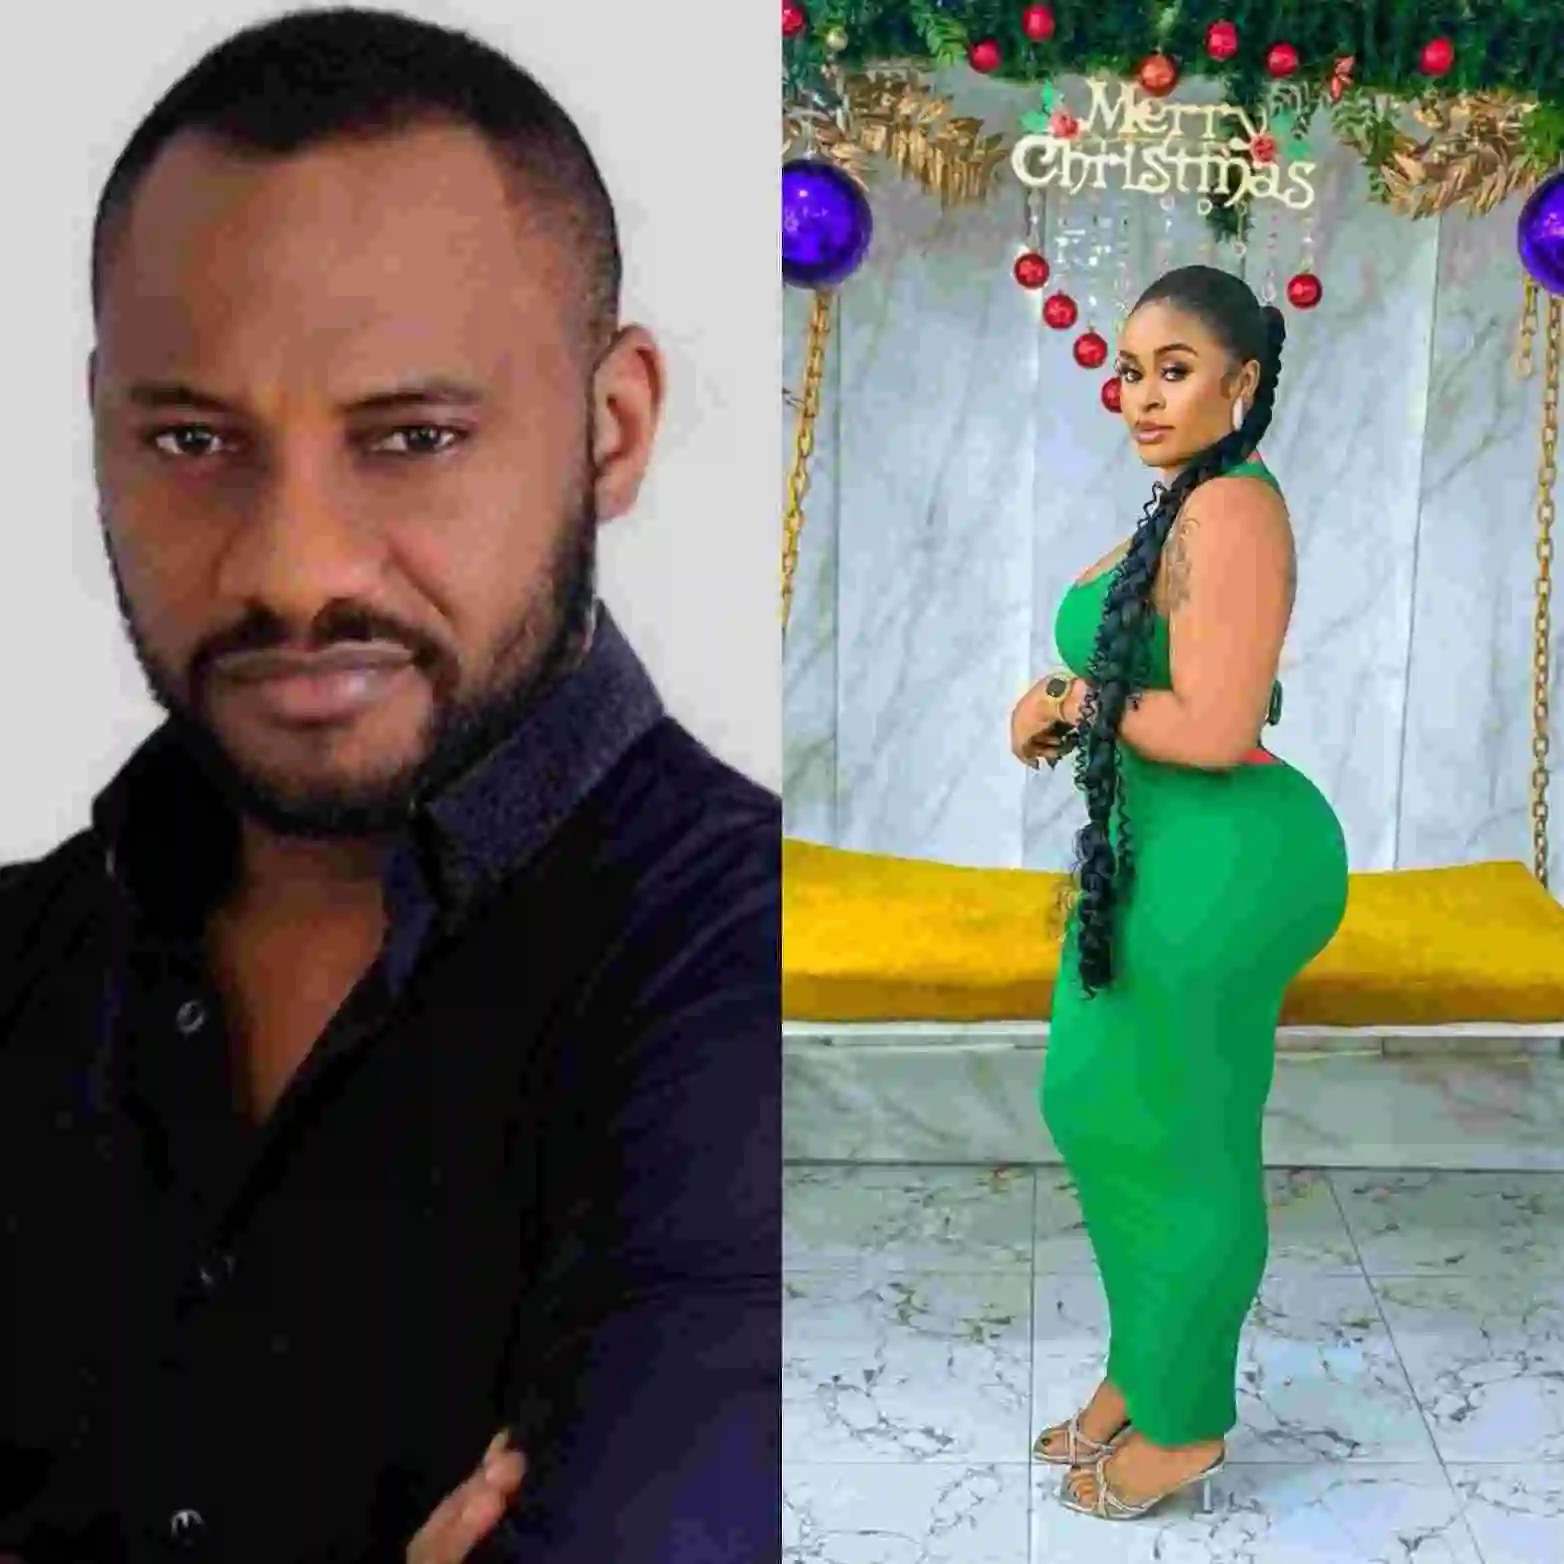 This Can't Possibly Be Your Best Year, Pay My 50k - Sarah Martins Slams Yul Edochie For Saying 2023 Is His Best Year